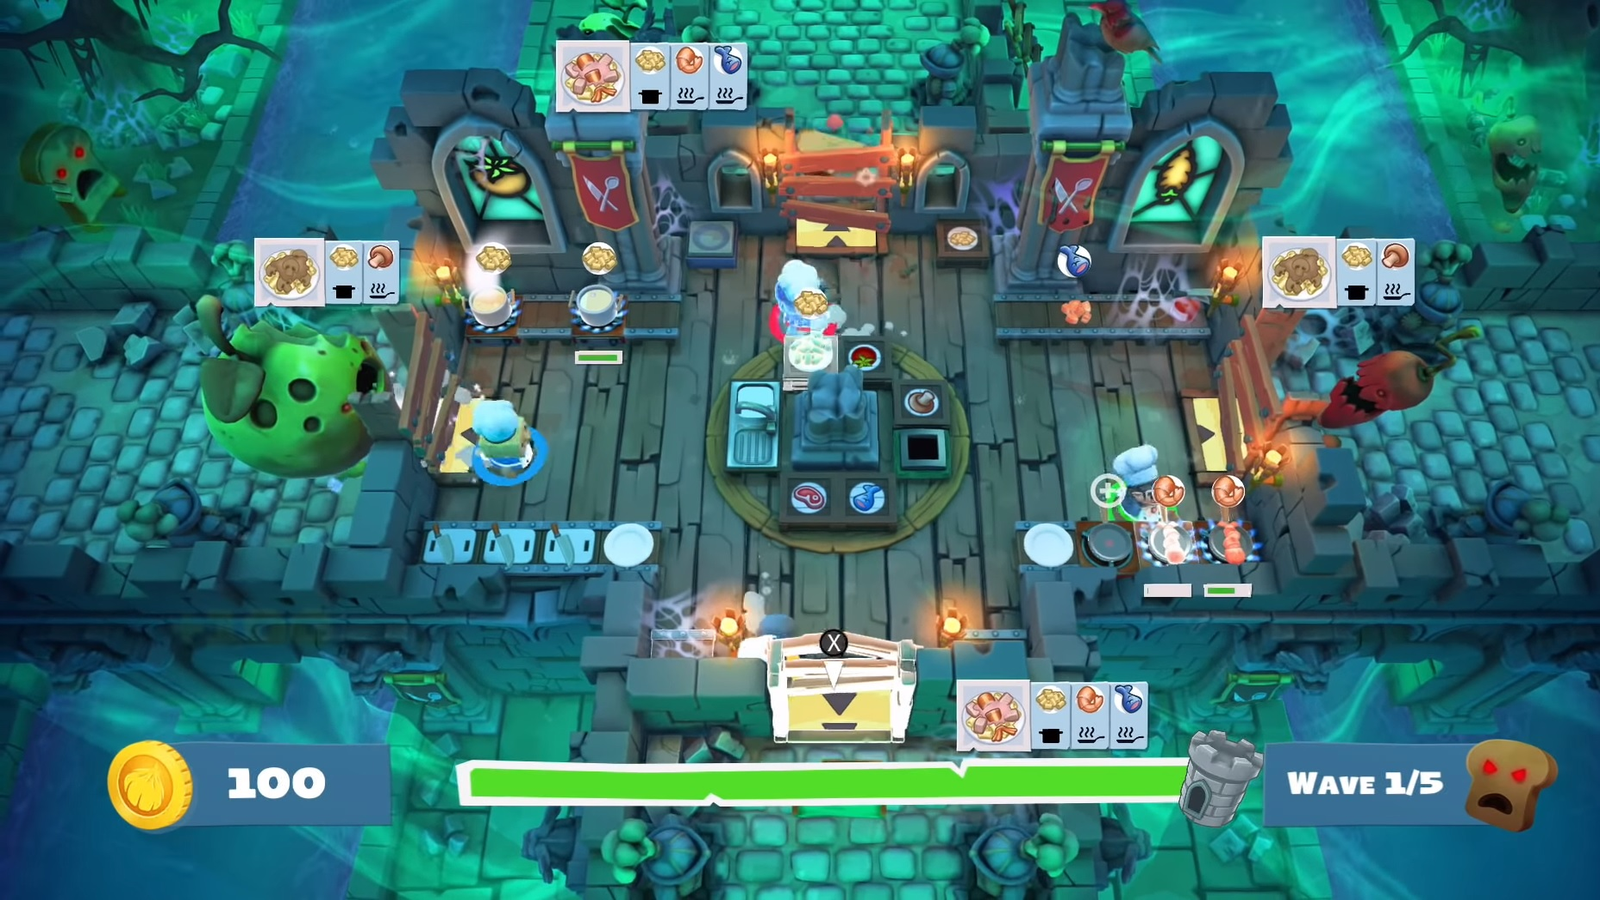 New Overcooked levels are available for free now